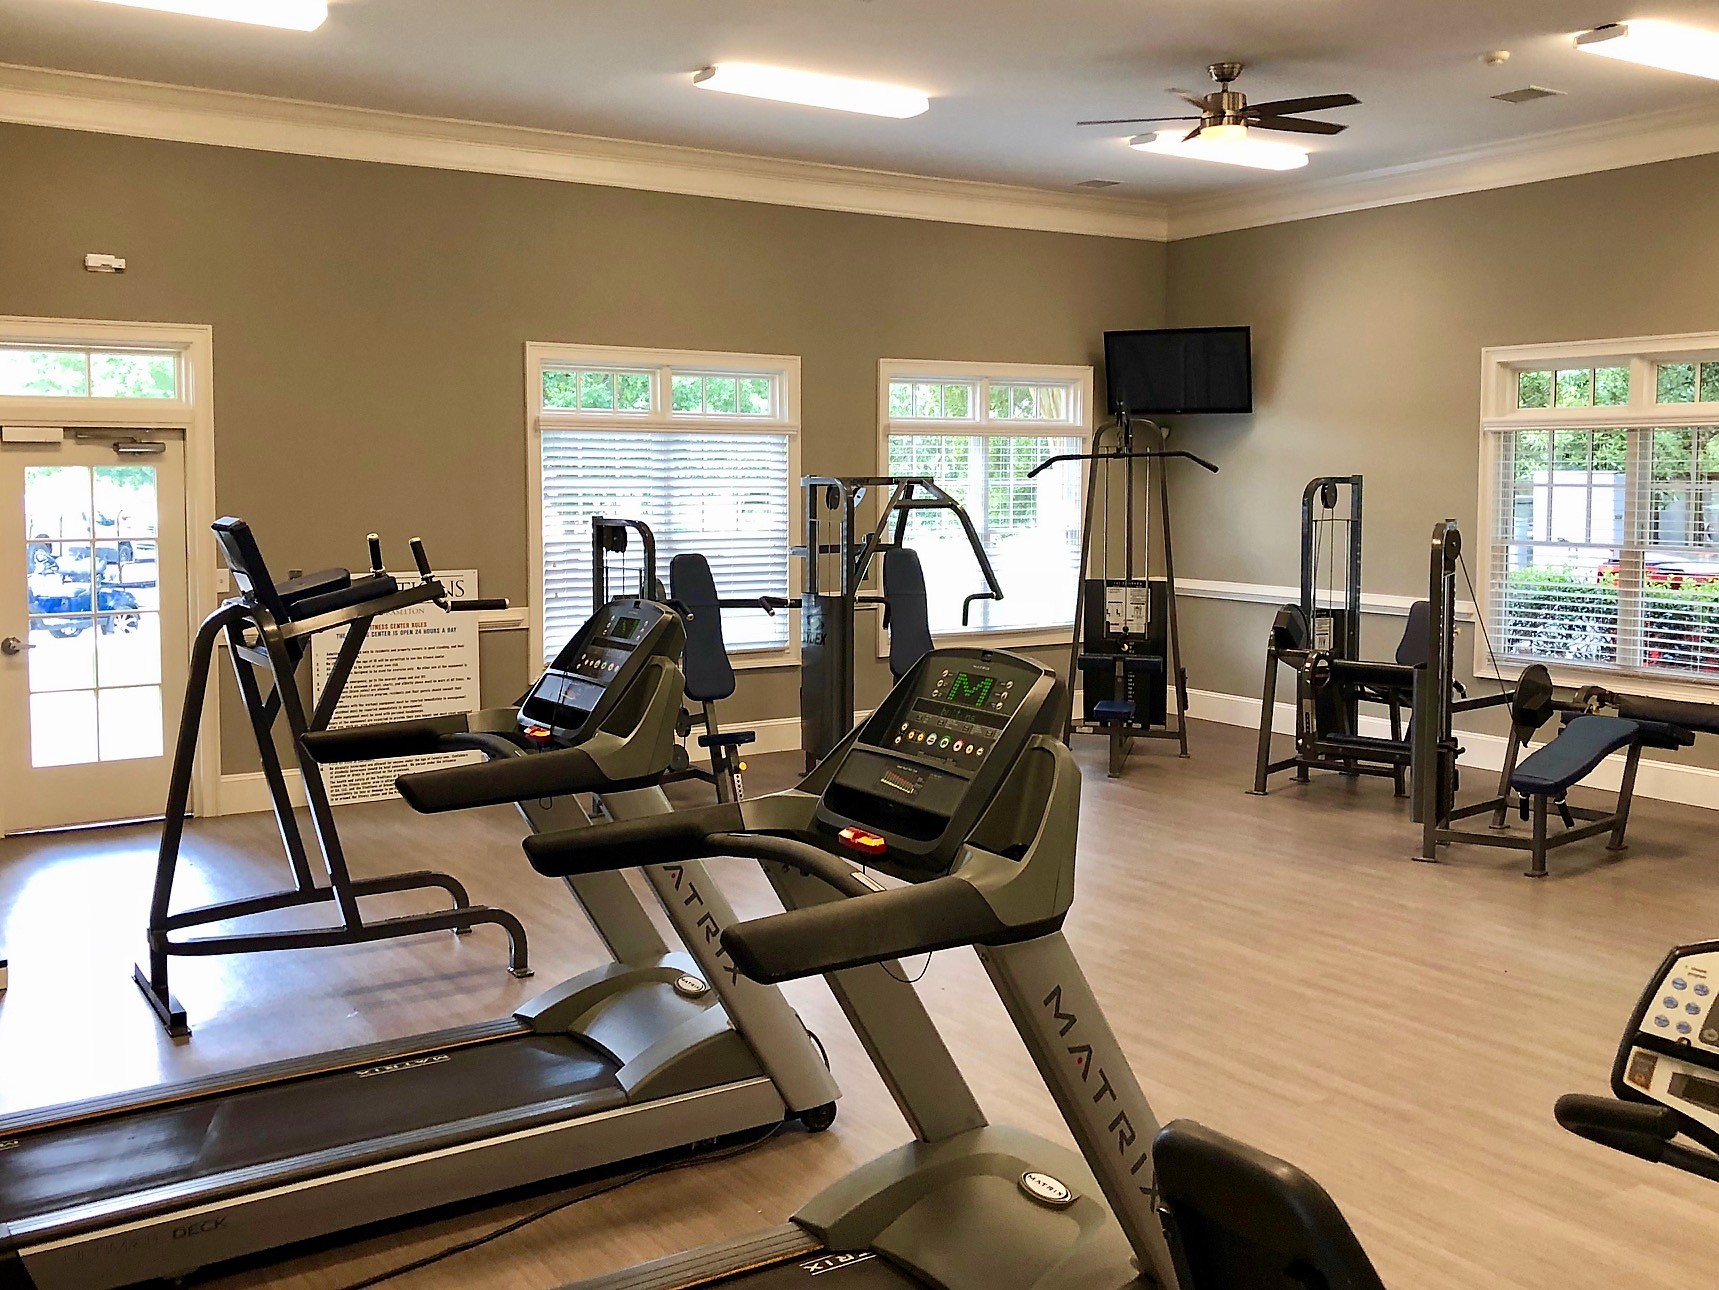 Fitness Center at Traditions of Braselton